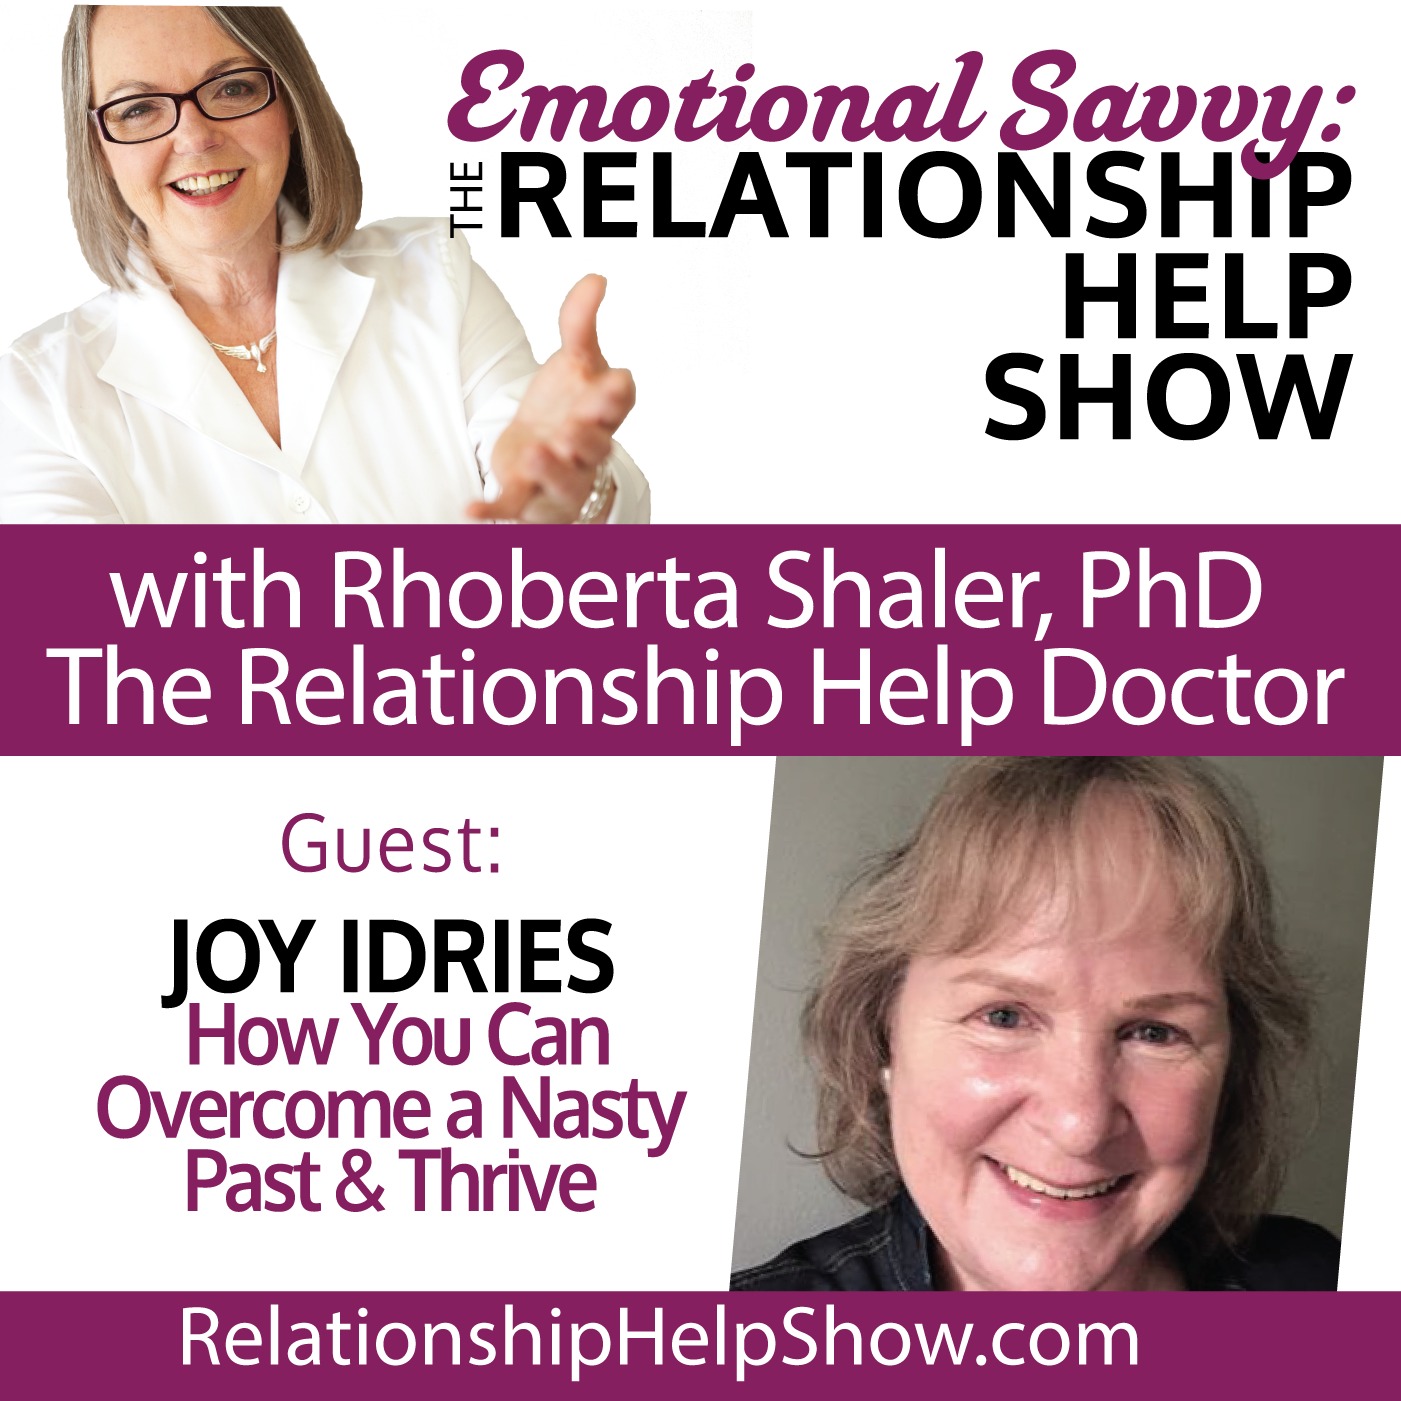 How You Can Overcome a Nasty Past and Thrive  GUEST - Joy Idries